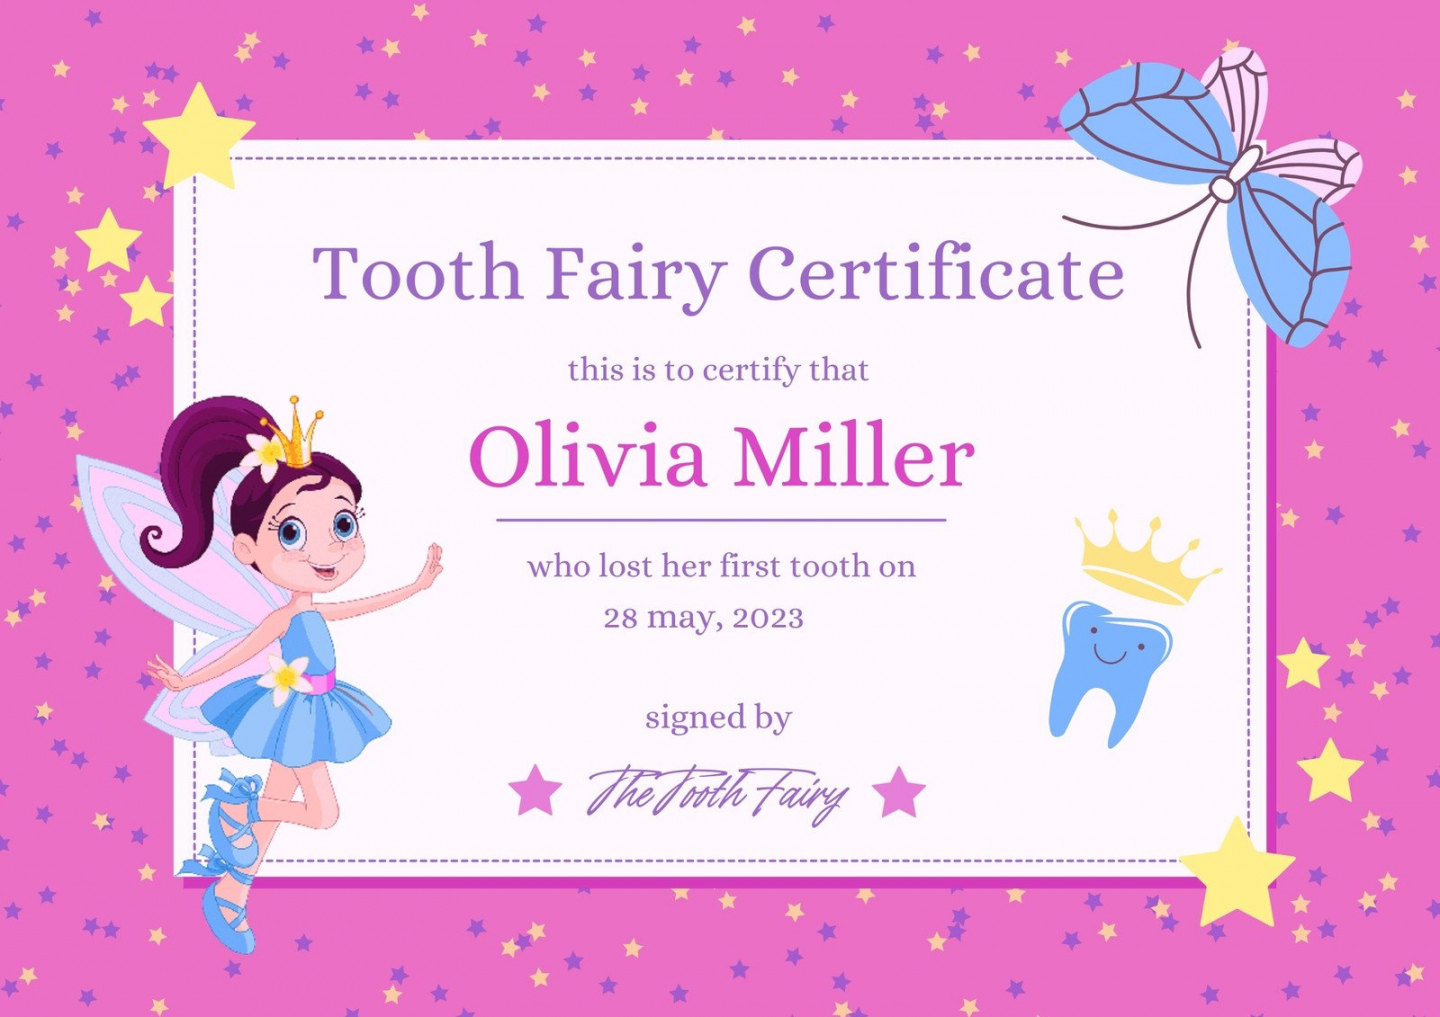 Free Printable Tooth Fairy Letter - Printable - Free customizable tooth fairy certificate templates  Canva